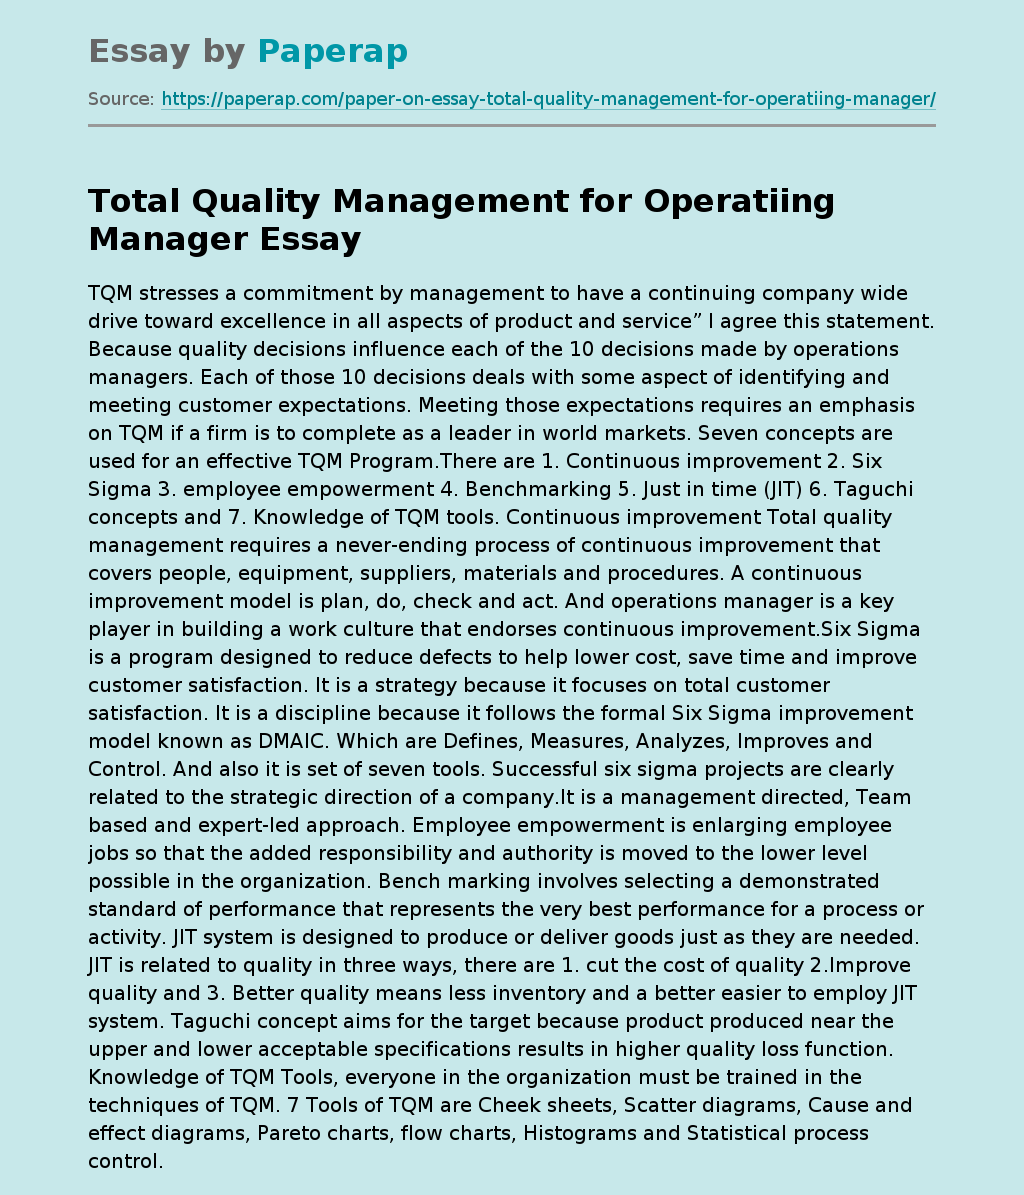 Total Quality Management for Operatiing Manager